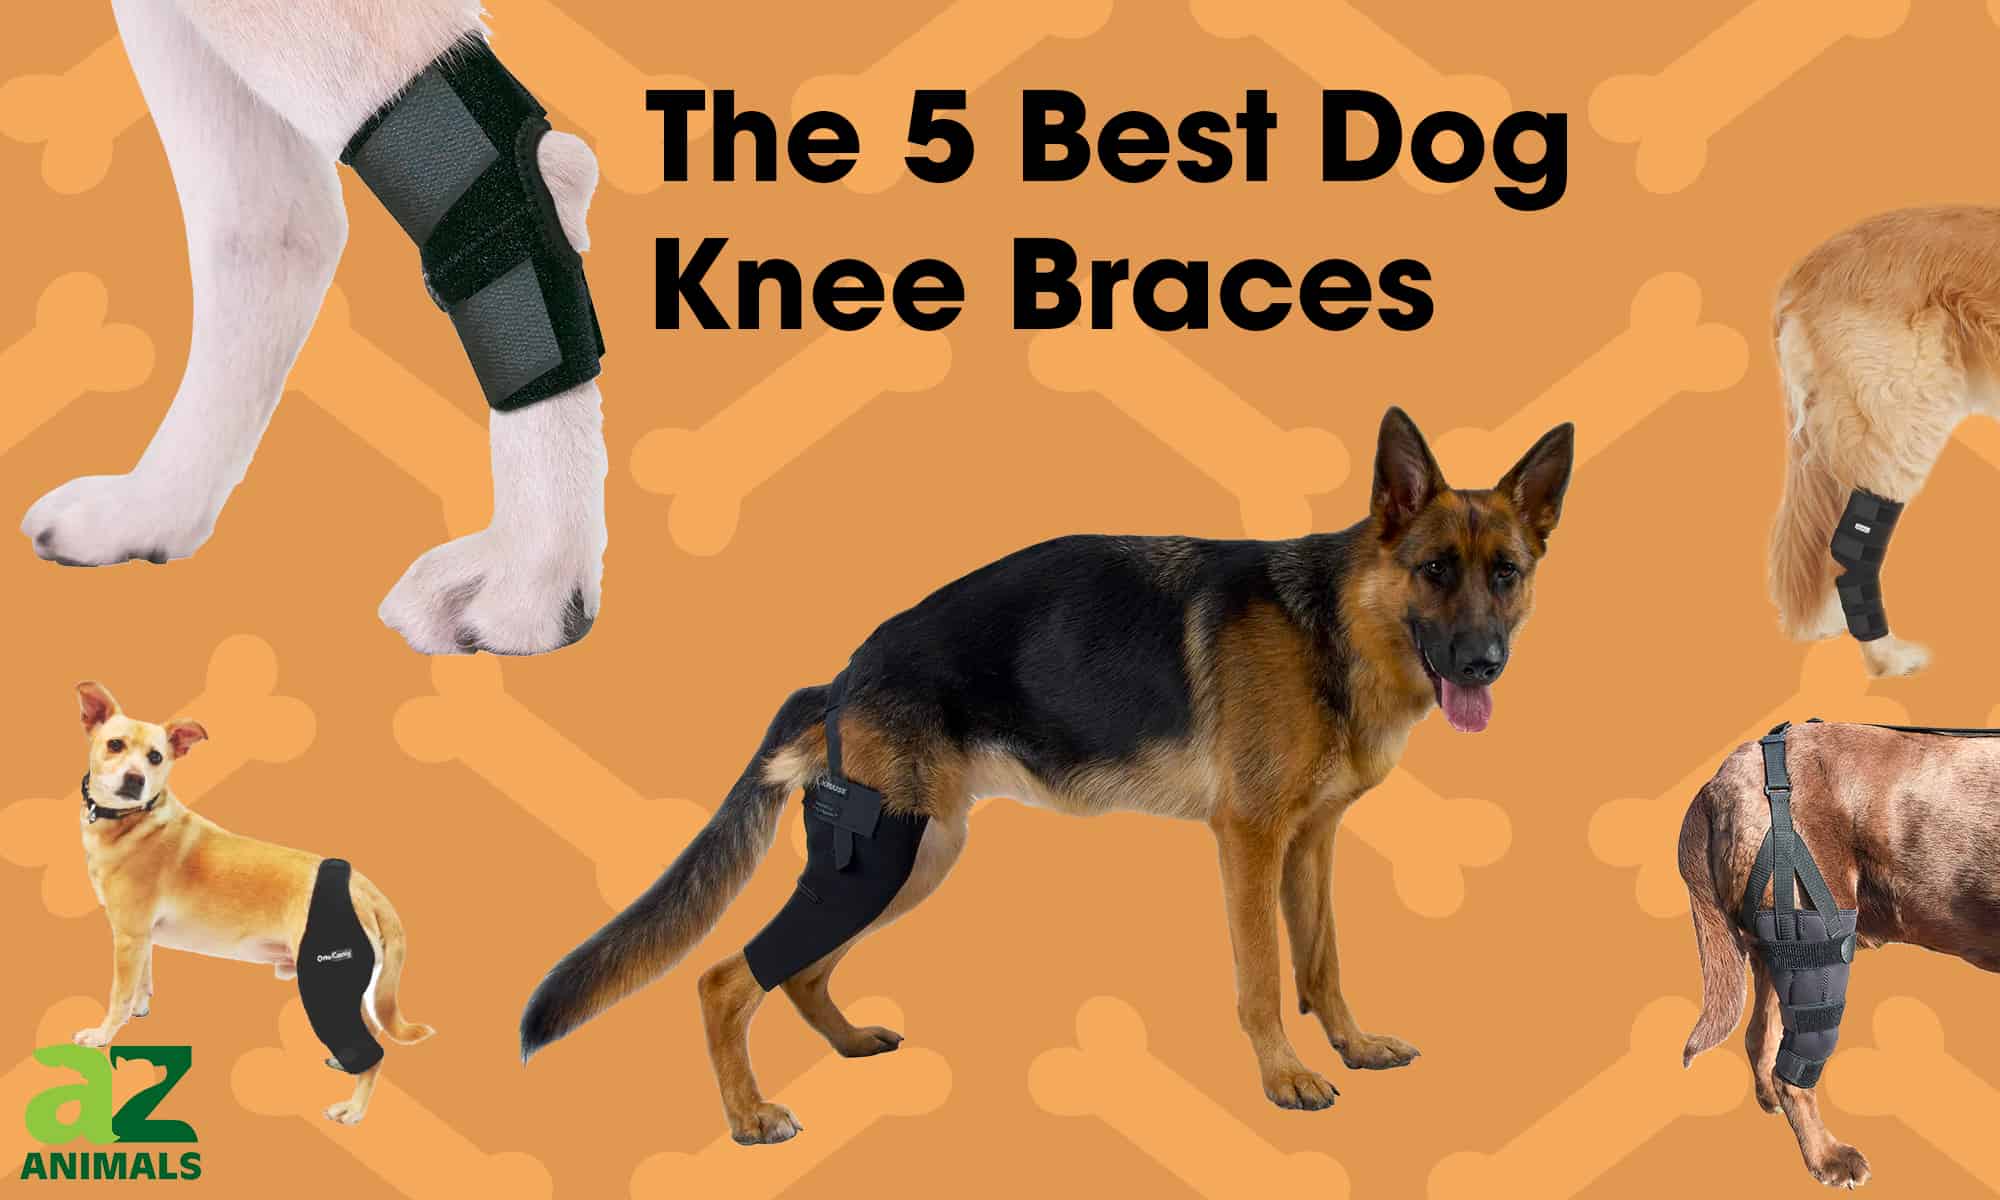 Dogs wear two different types of leg braces